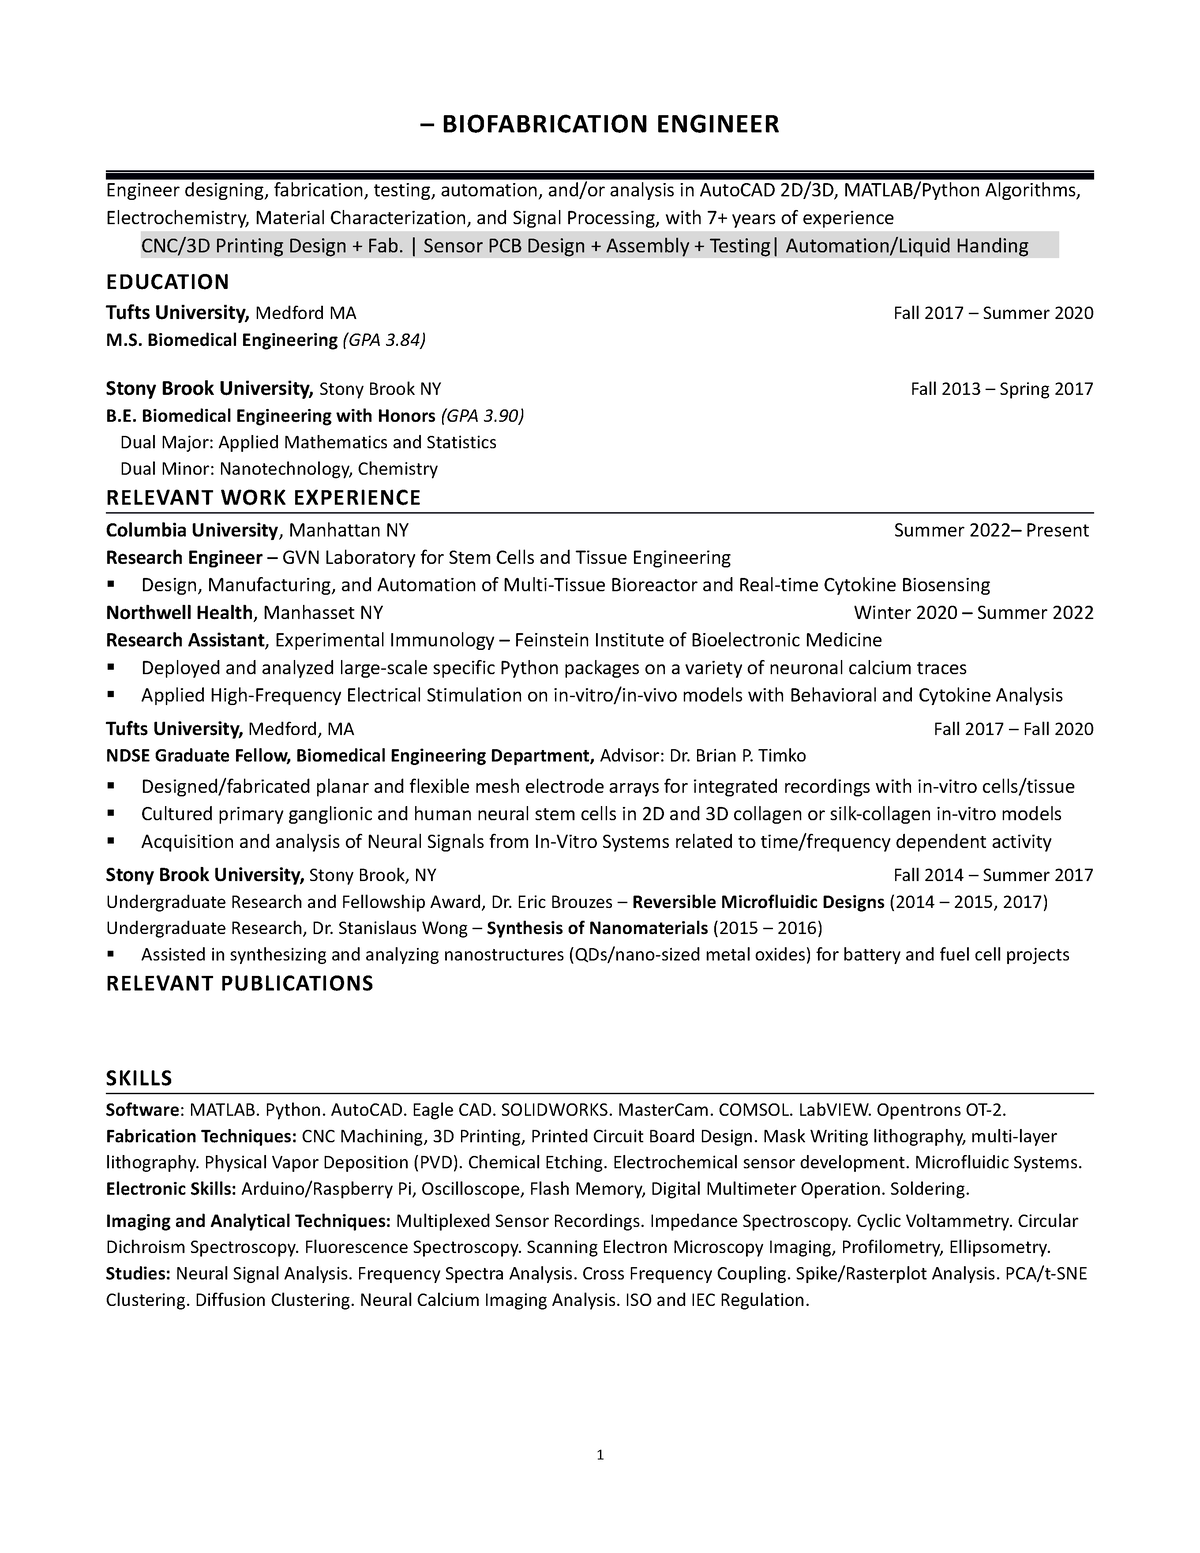 resume-final-biofabrication-engineer-automation-example